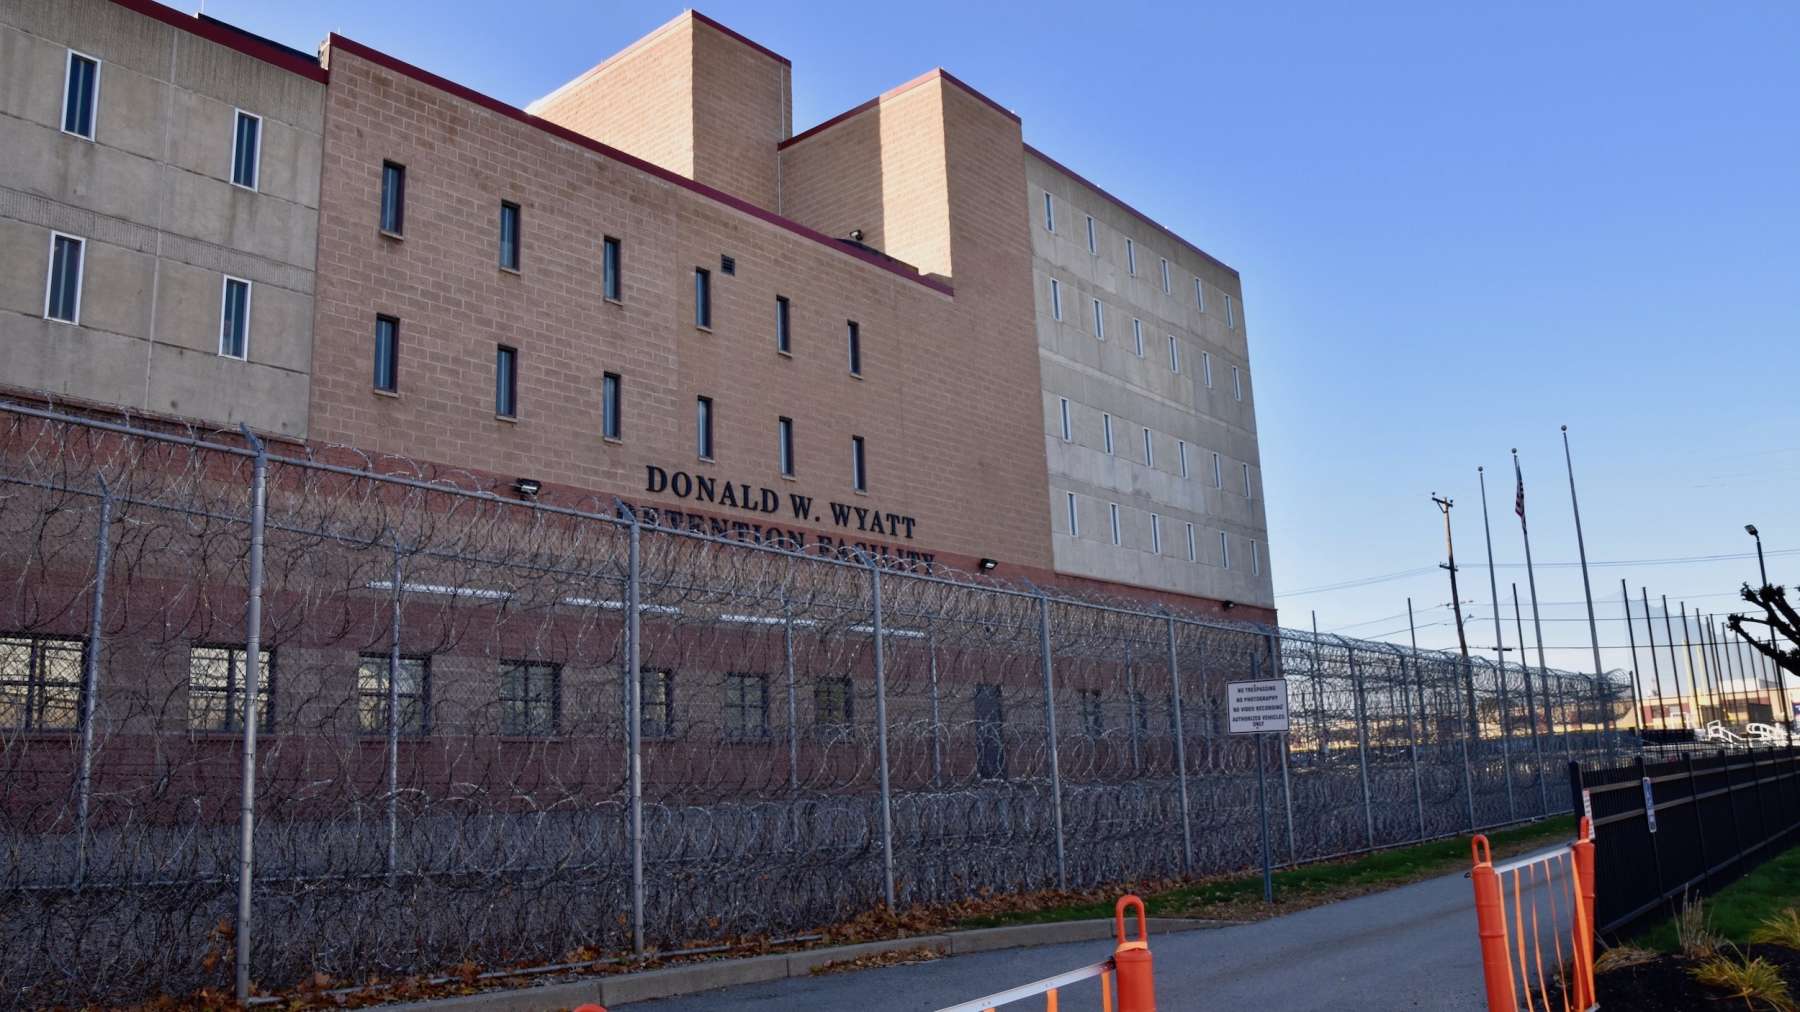 Rhode Island News: Until May 19th, Wyatt prisoners with Opioid Use Disorder underwent forced withdrawal, a form of torture